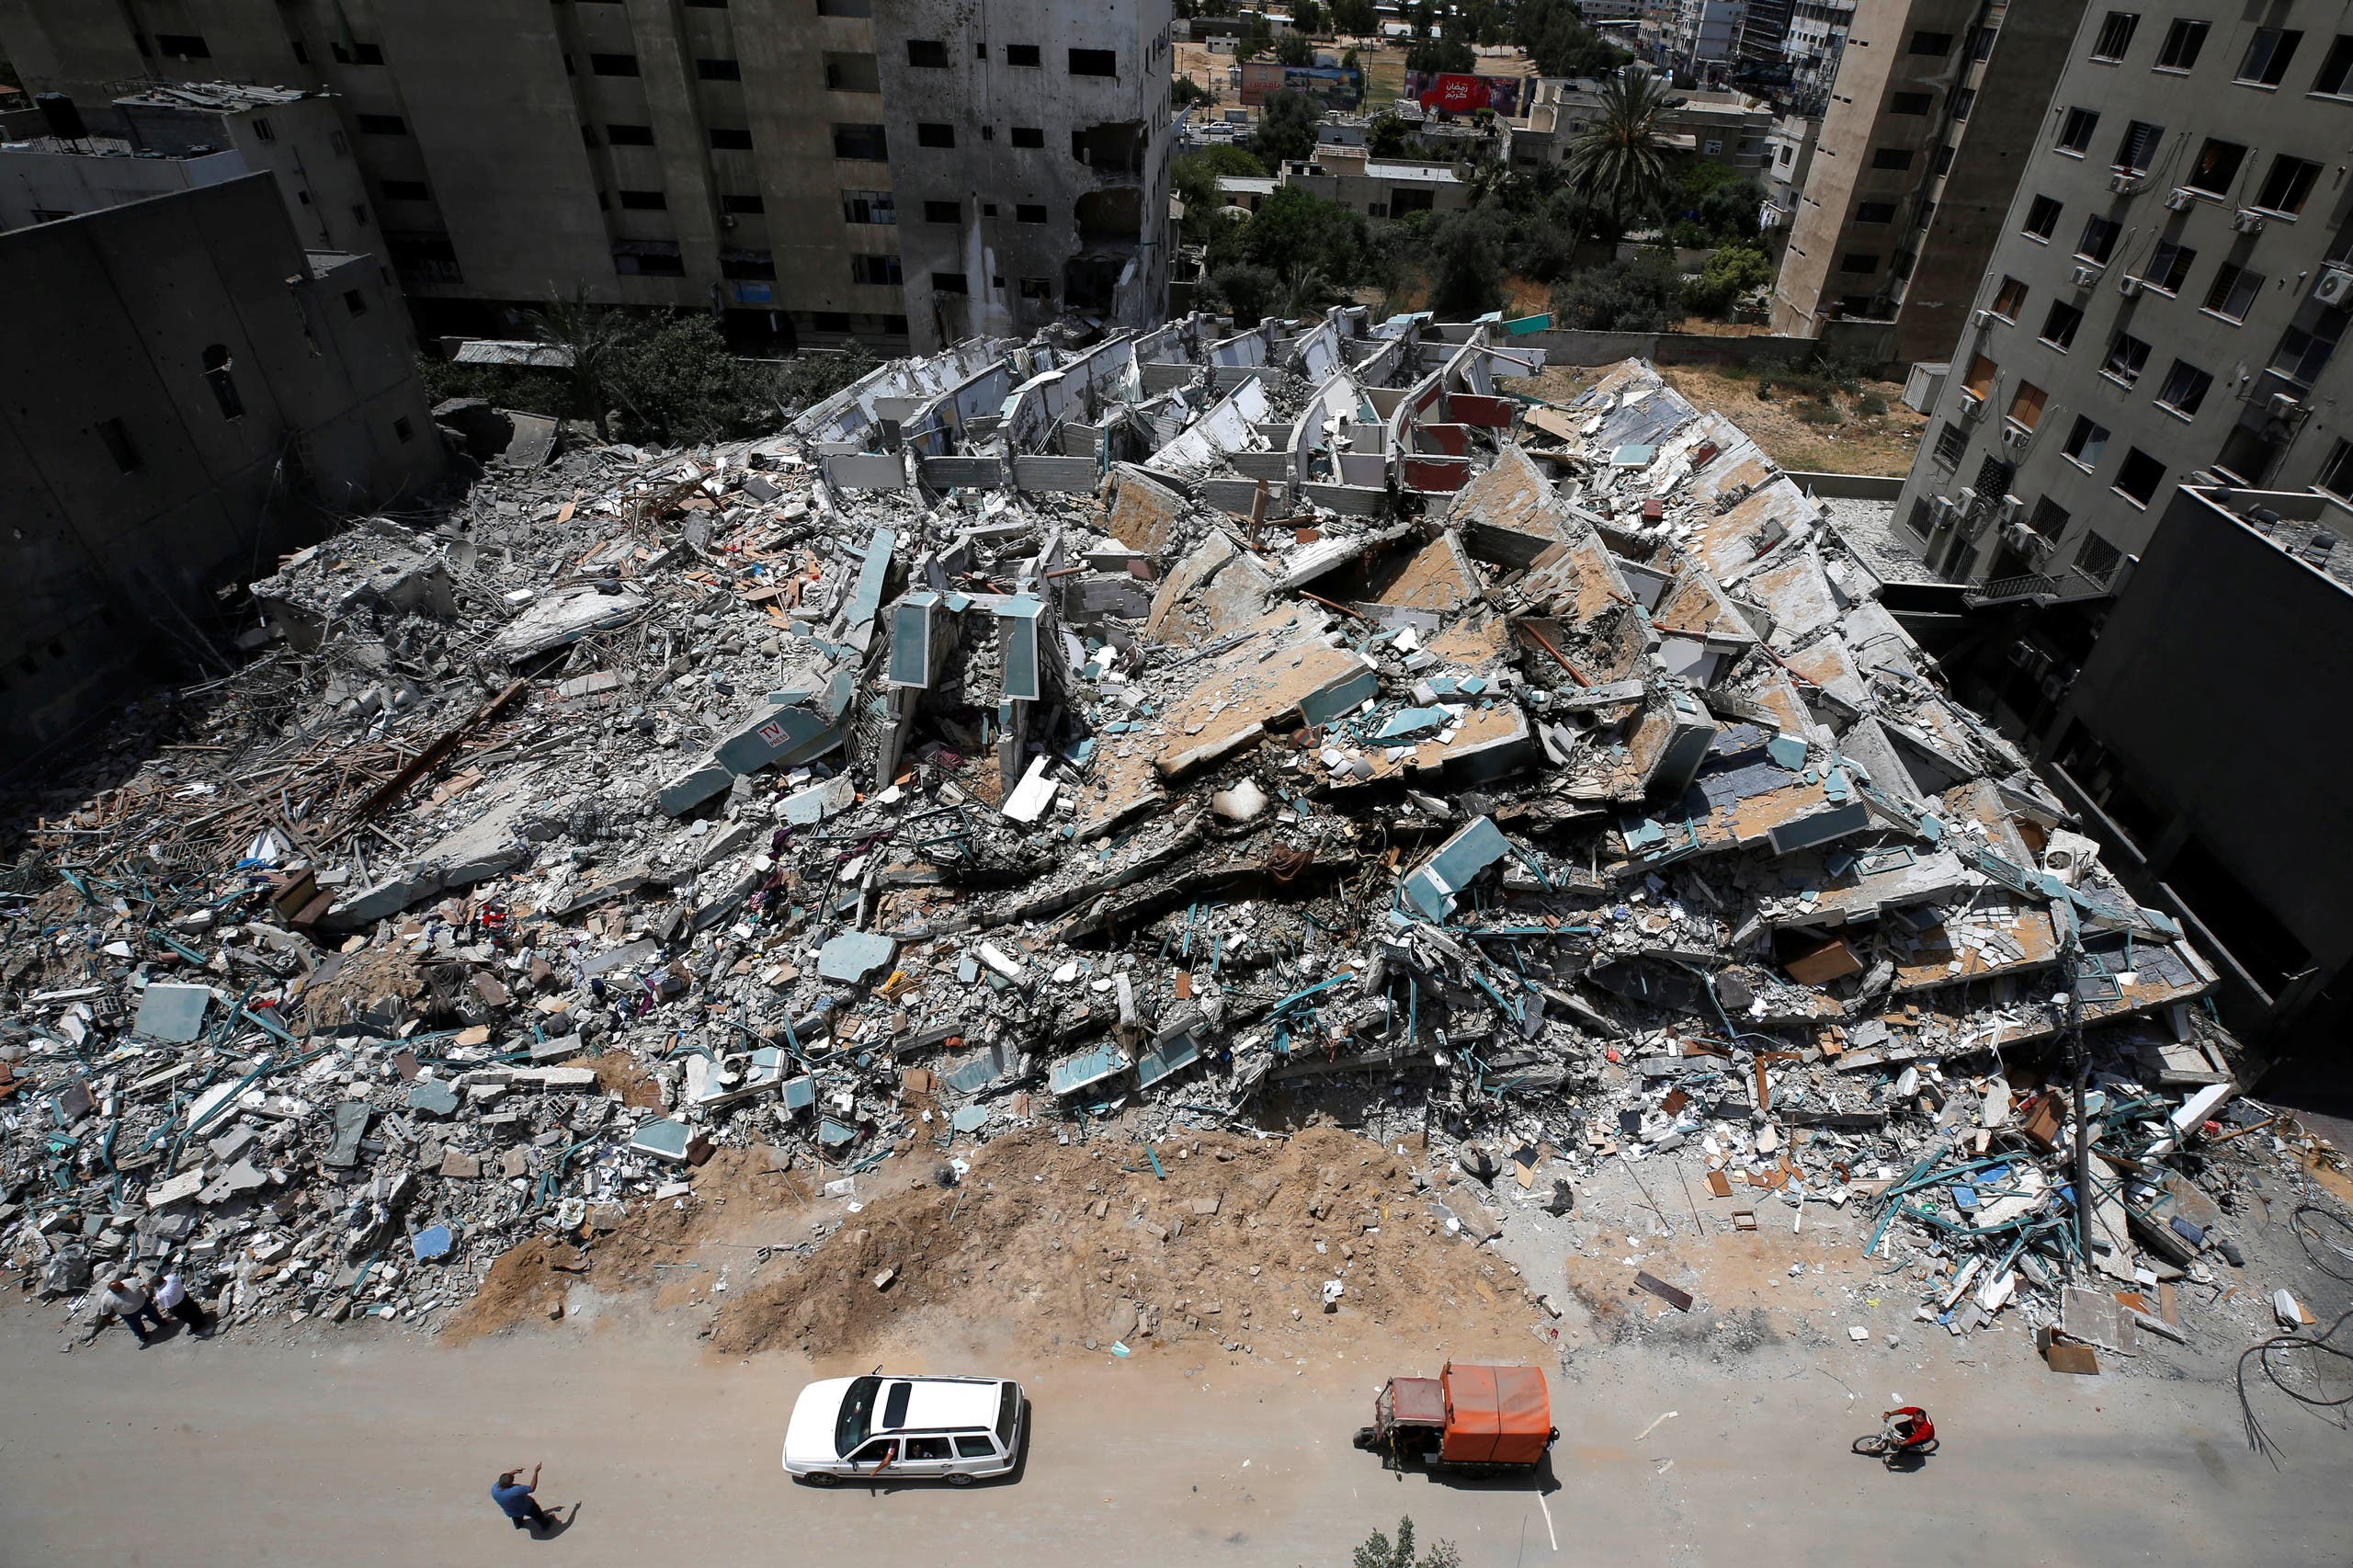 Destruction is the predominant scene in Gaza after 11 days of bombing